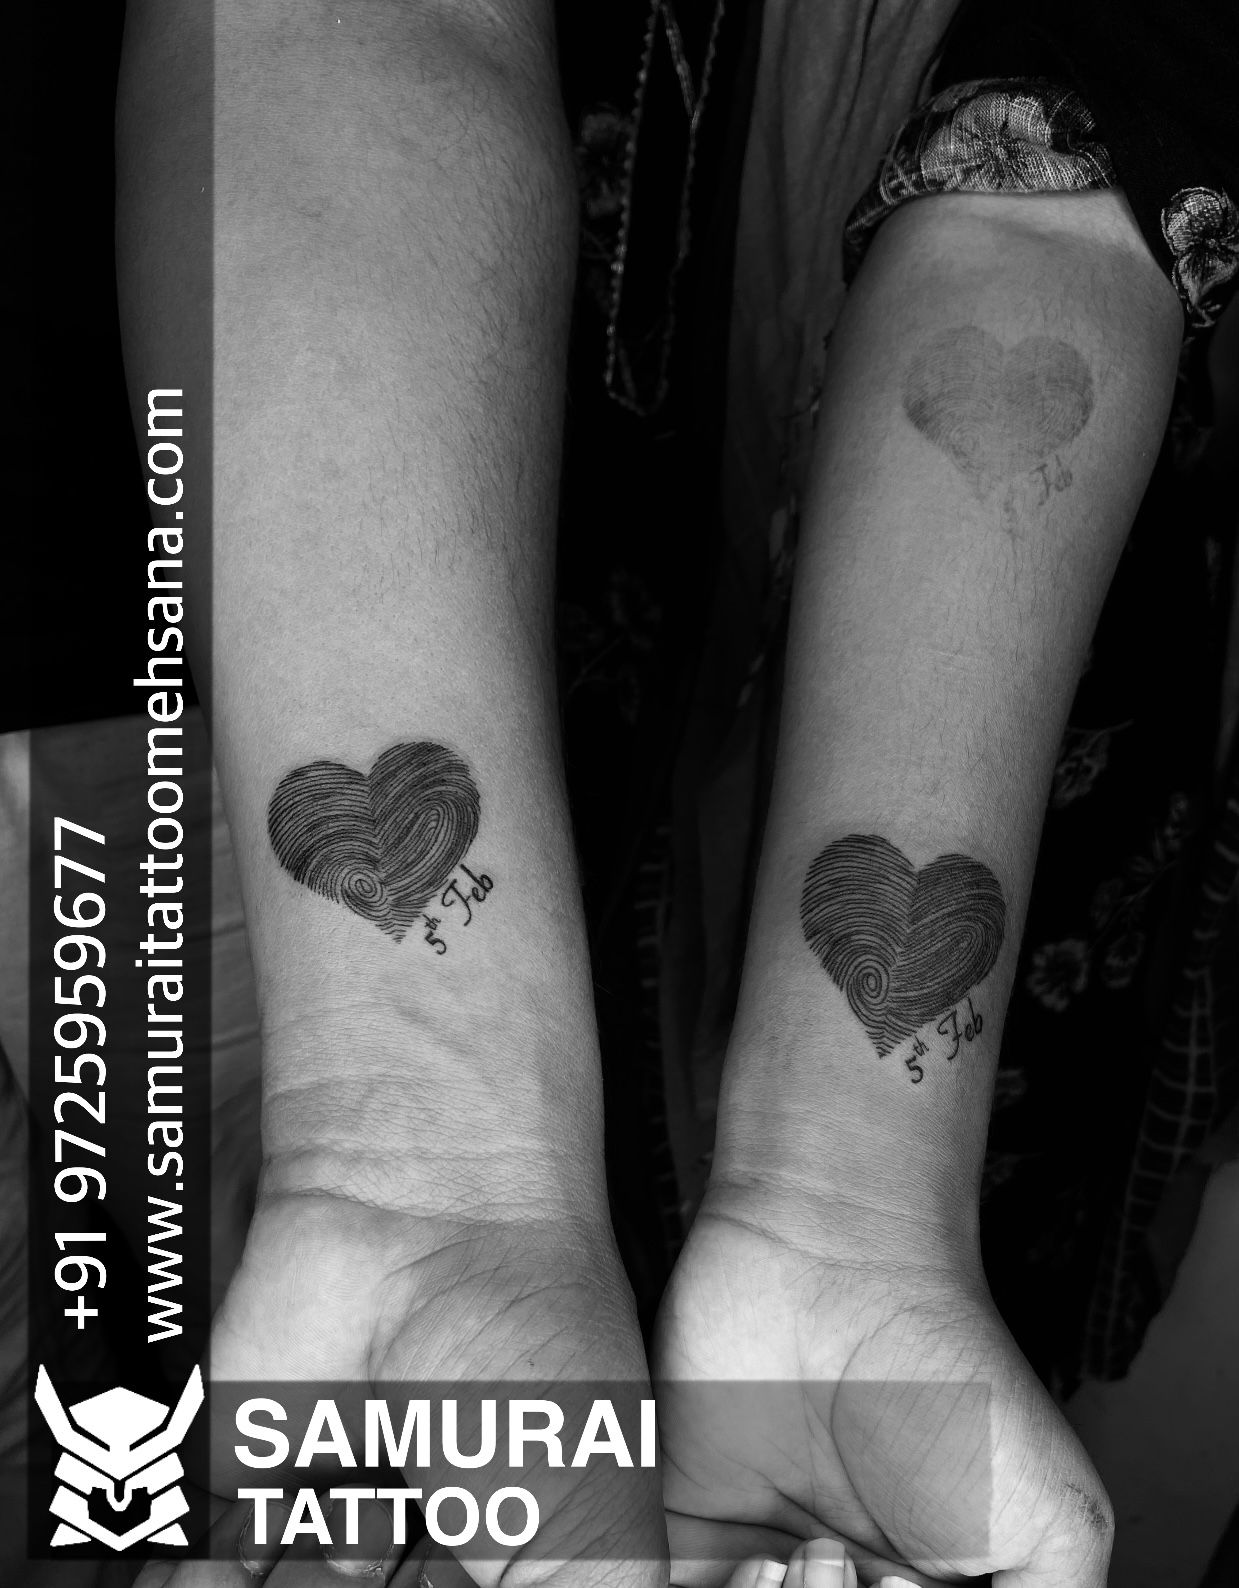 Matching fingerprint and heartbeat tattoo for sisters.